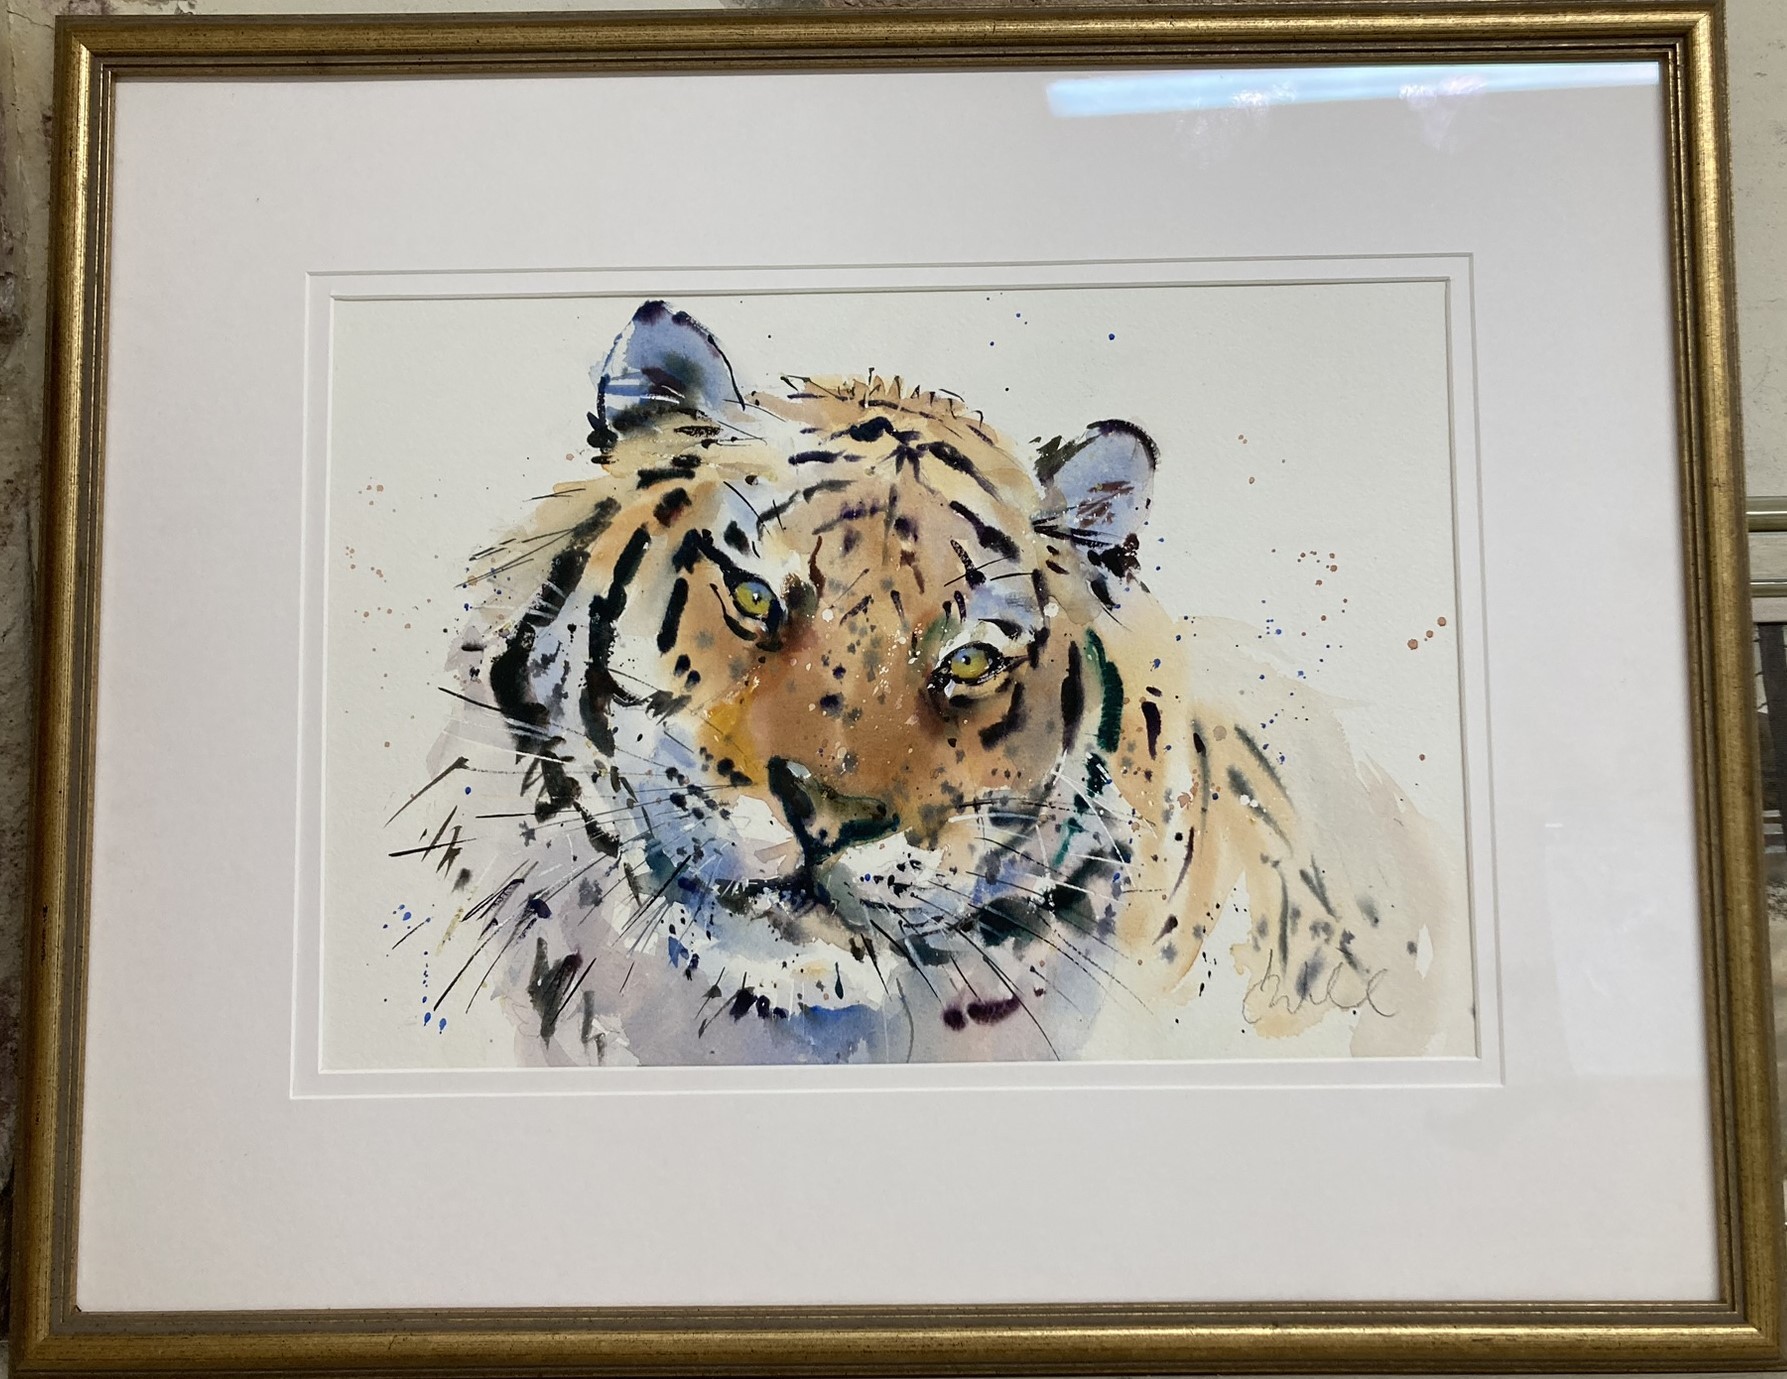 Larson Juhl, study of a tiger, watercolour, signed, 32 x 47 cm - Image 2 of 3